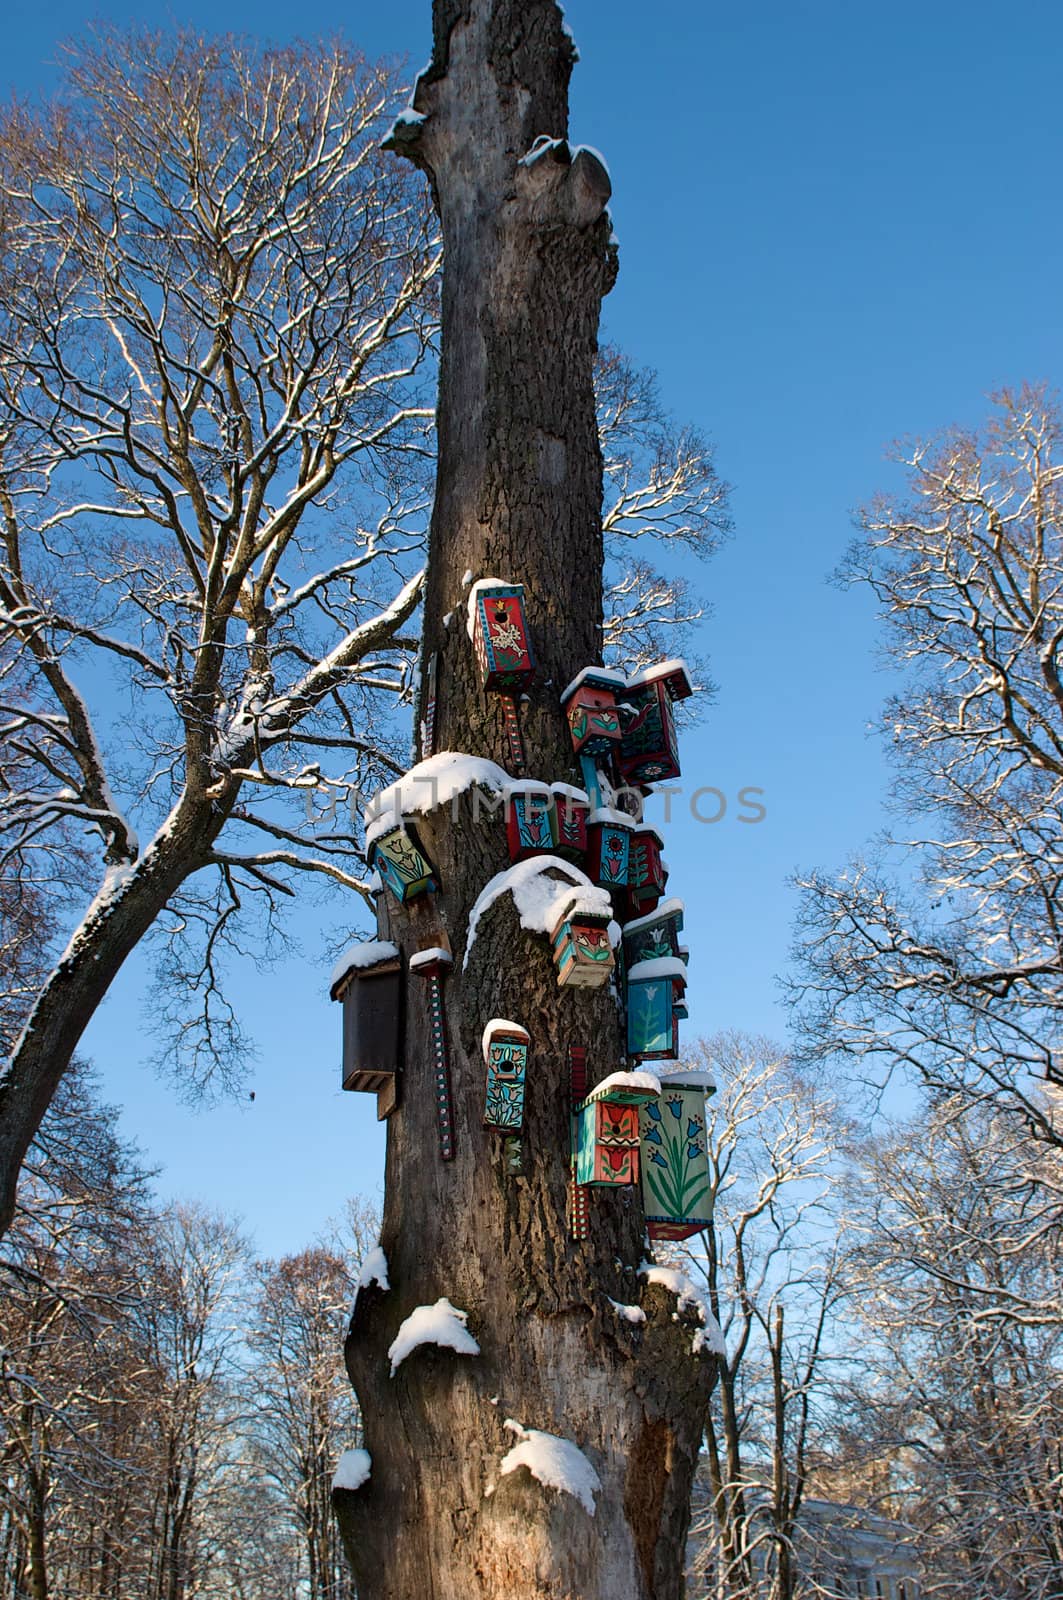 Nesting boxes on a snow covered tree in a winter forest